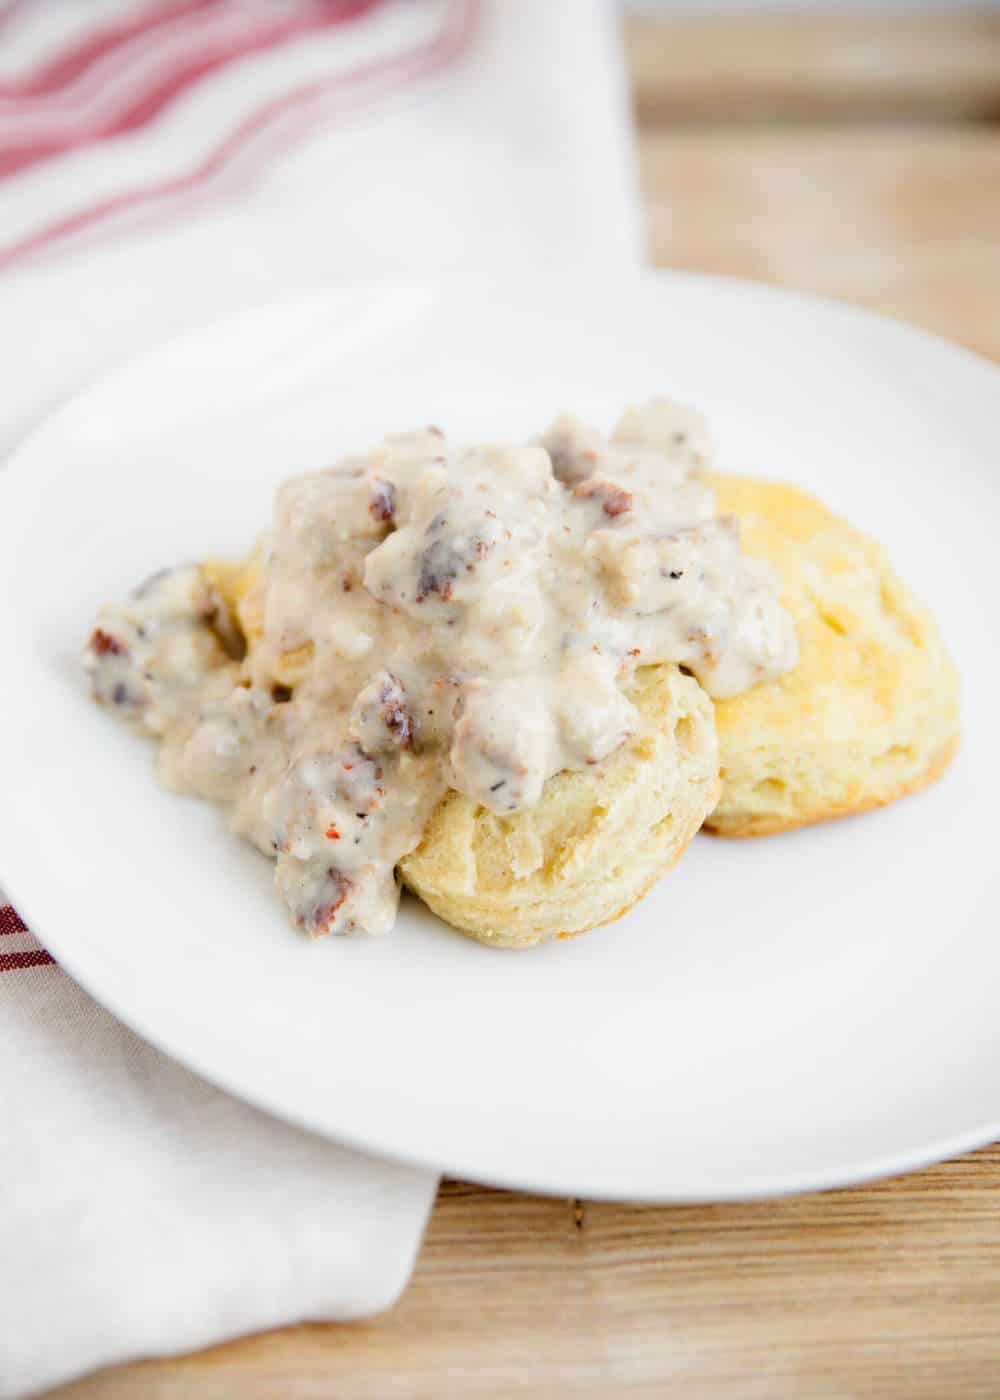 biscuits and gravy on a white plate 